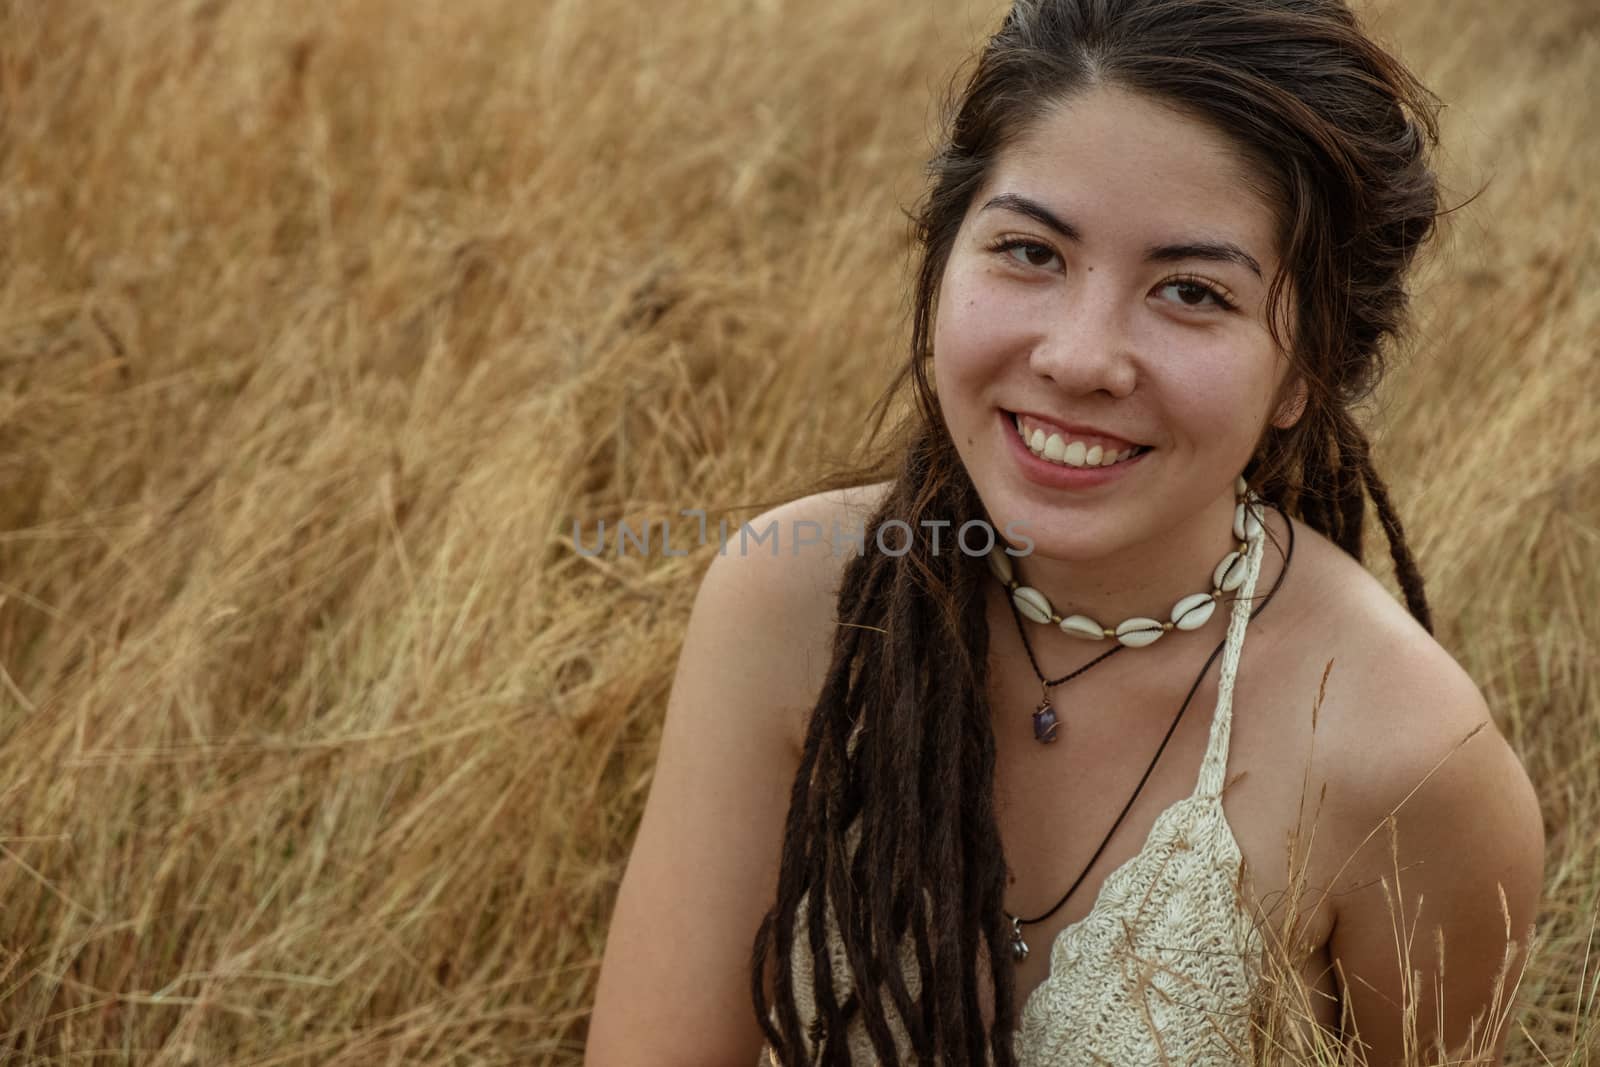 Young Woman Sitting On Dry Grass by snep_photo